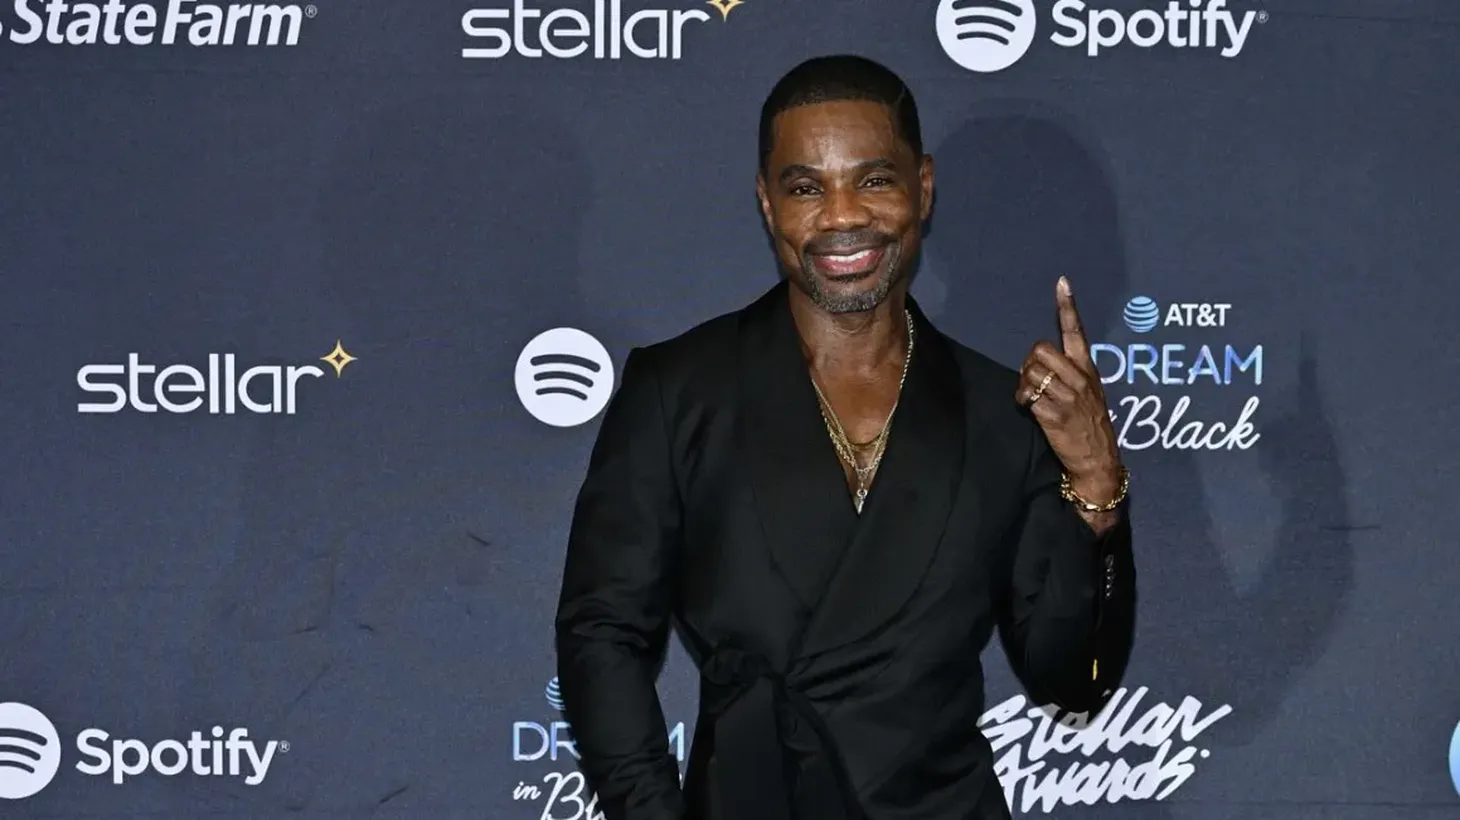 “At the core of gospel music is that we're trying to lovingly and compassionately push people to … a fact that you were built for something bigger than the moments that you live in right now,” says gospel singer Kirk Franklin.